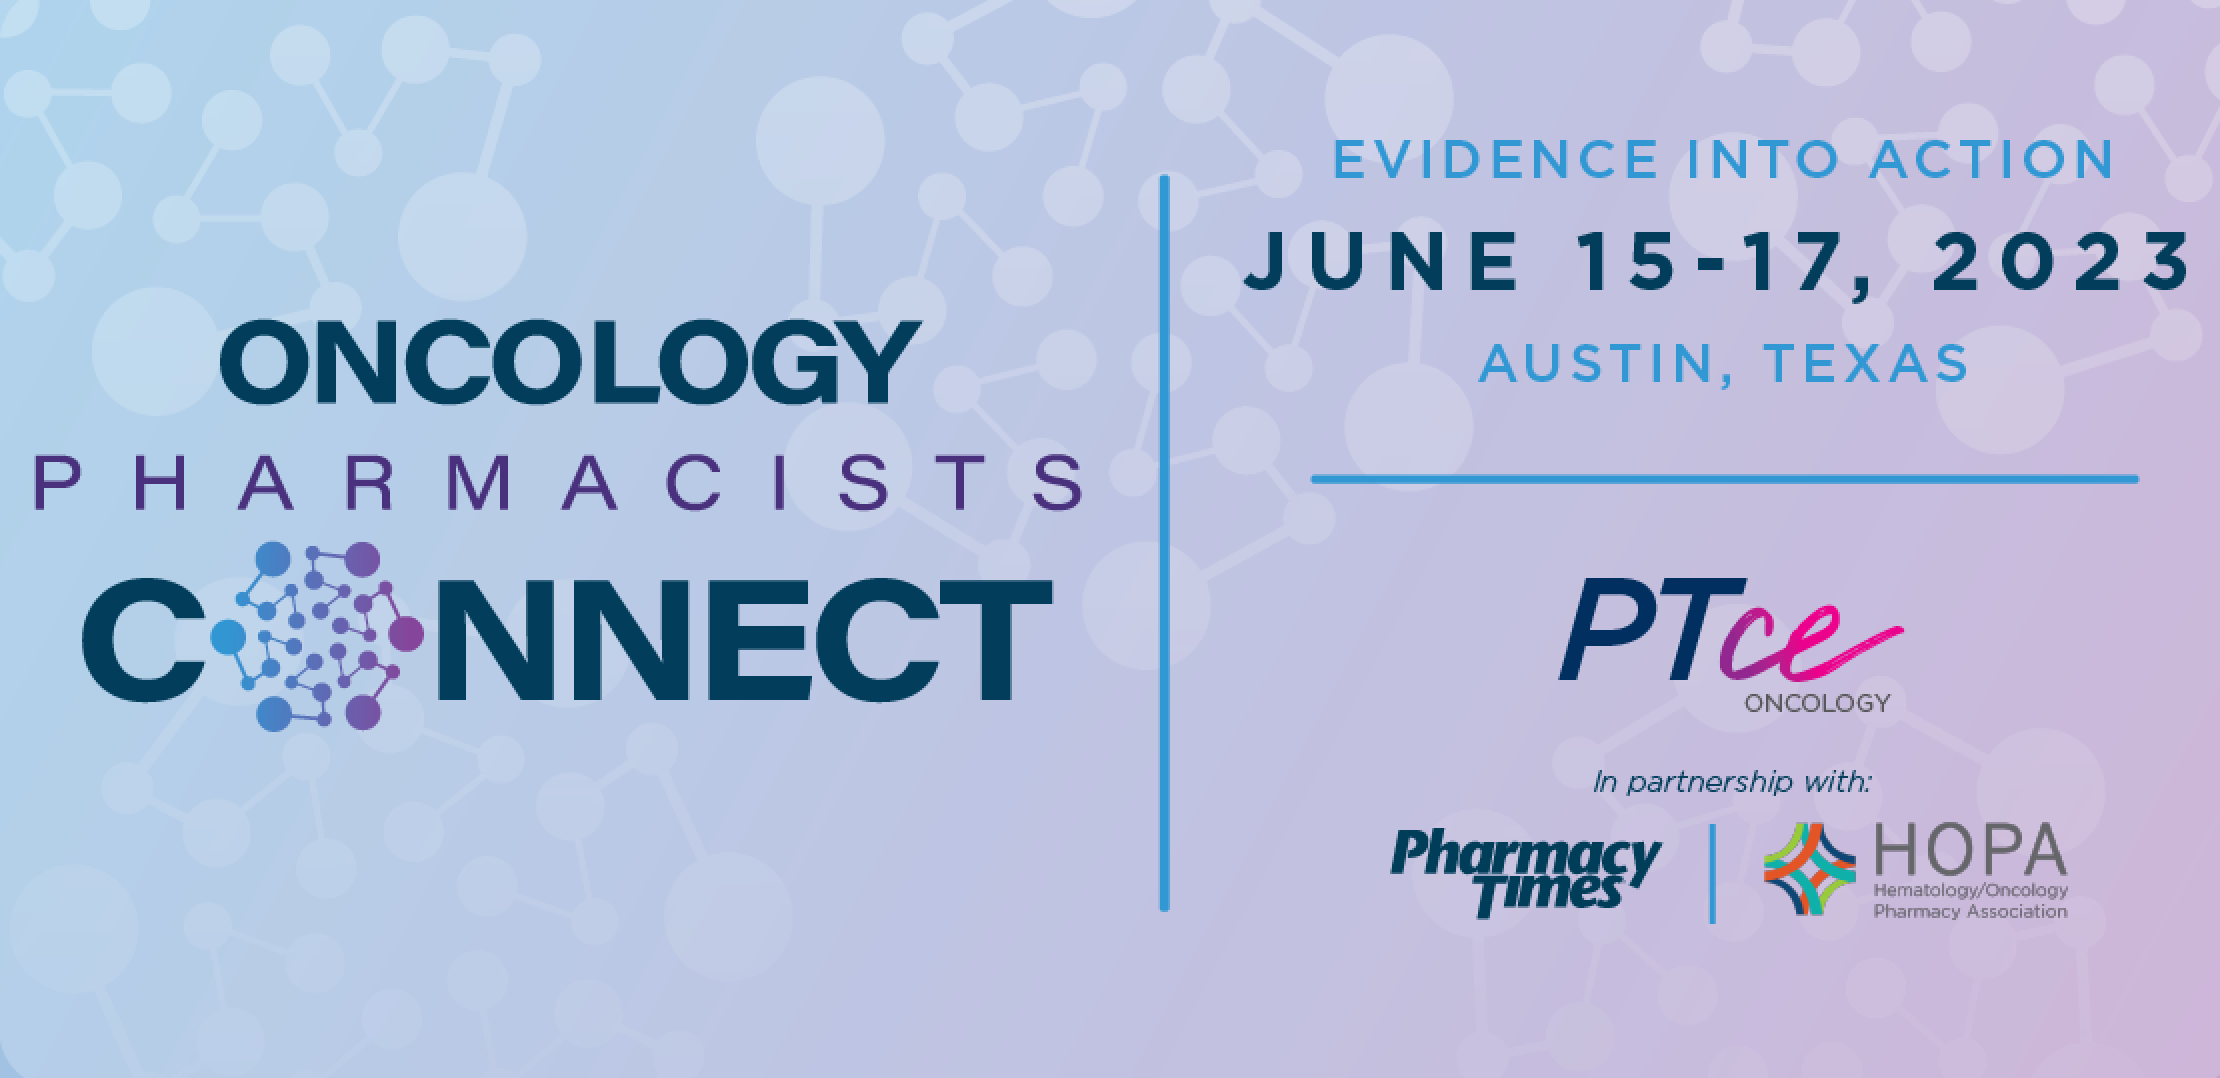 Oncology Pharmacists Connect meeting will be held from June 15-17, 2023, in Austin, Texas.